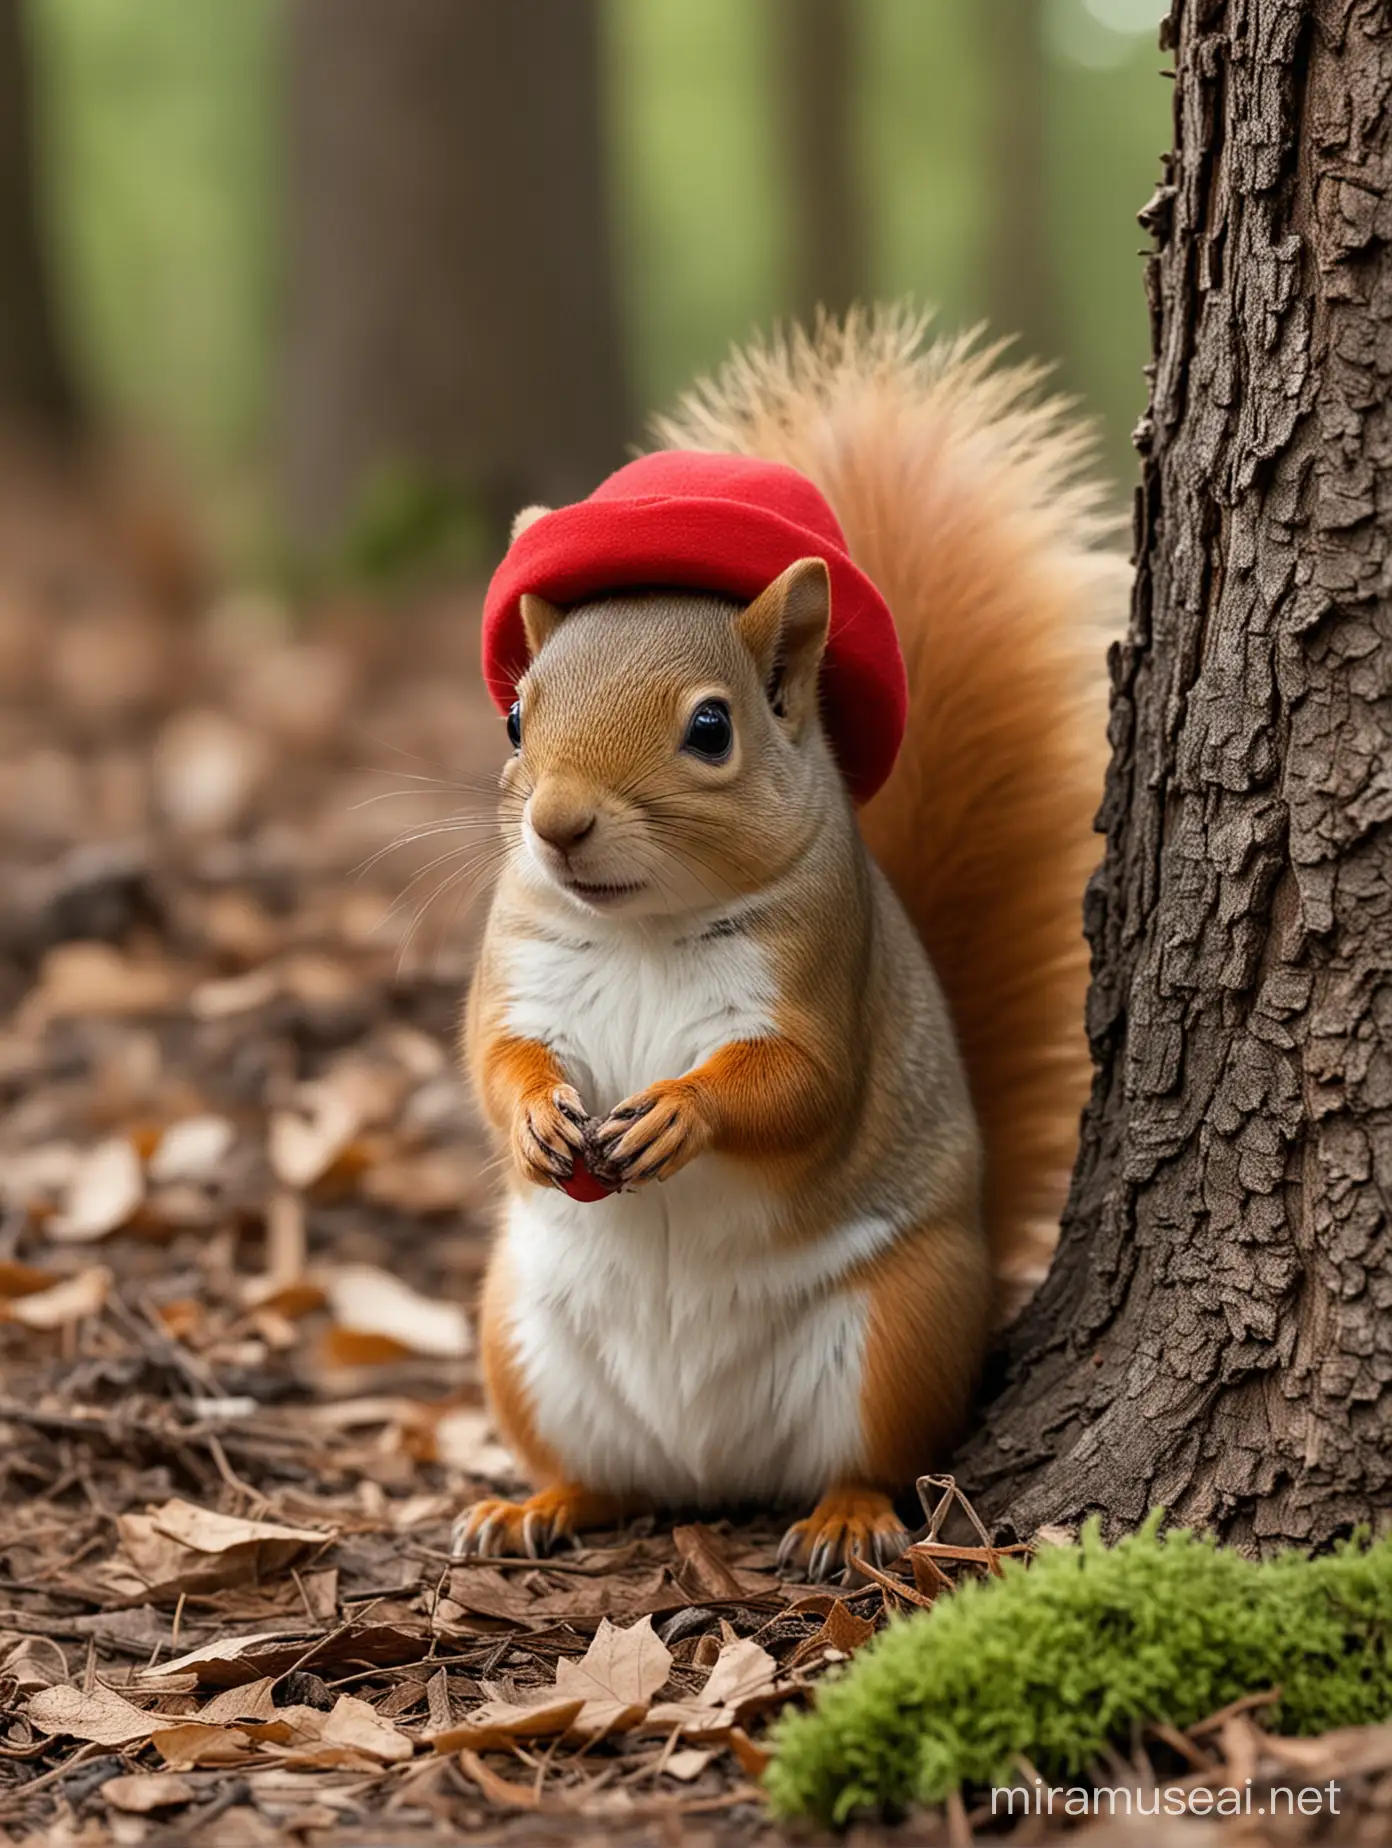 Enchanting Forest Dweller Adorable Squirrel in a Red Hat